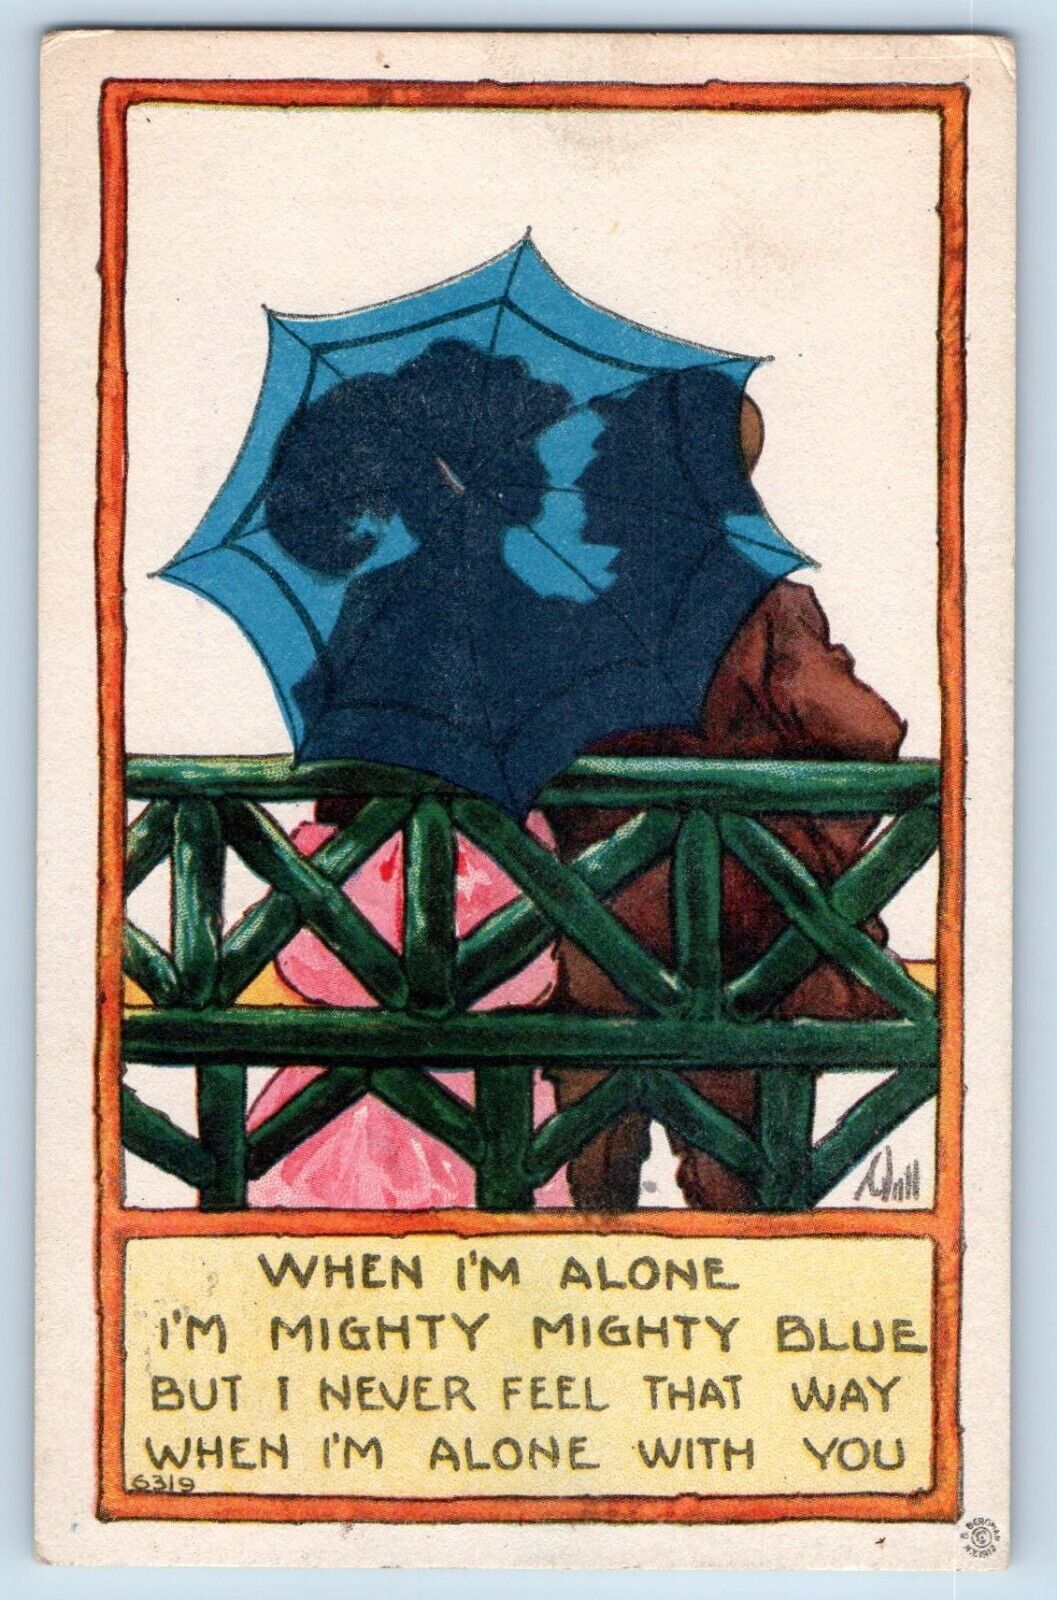 Wall Artist Signed Postcard Soldier Romance When I'm Alone I'm Mighty Blue 1914